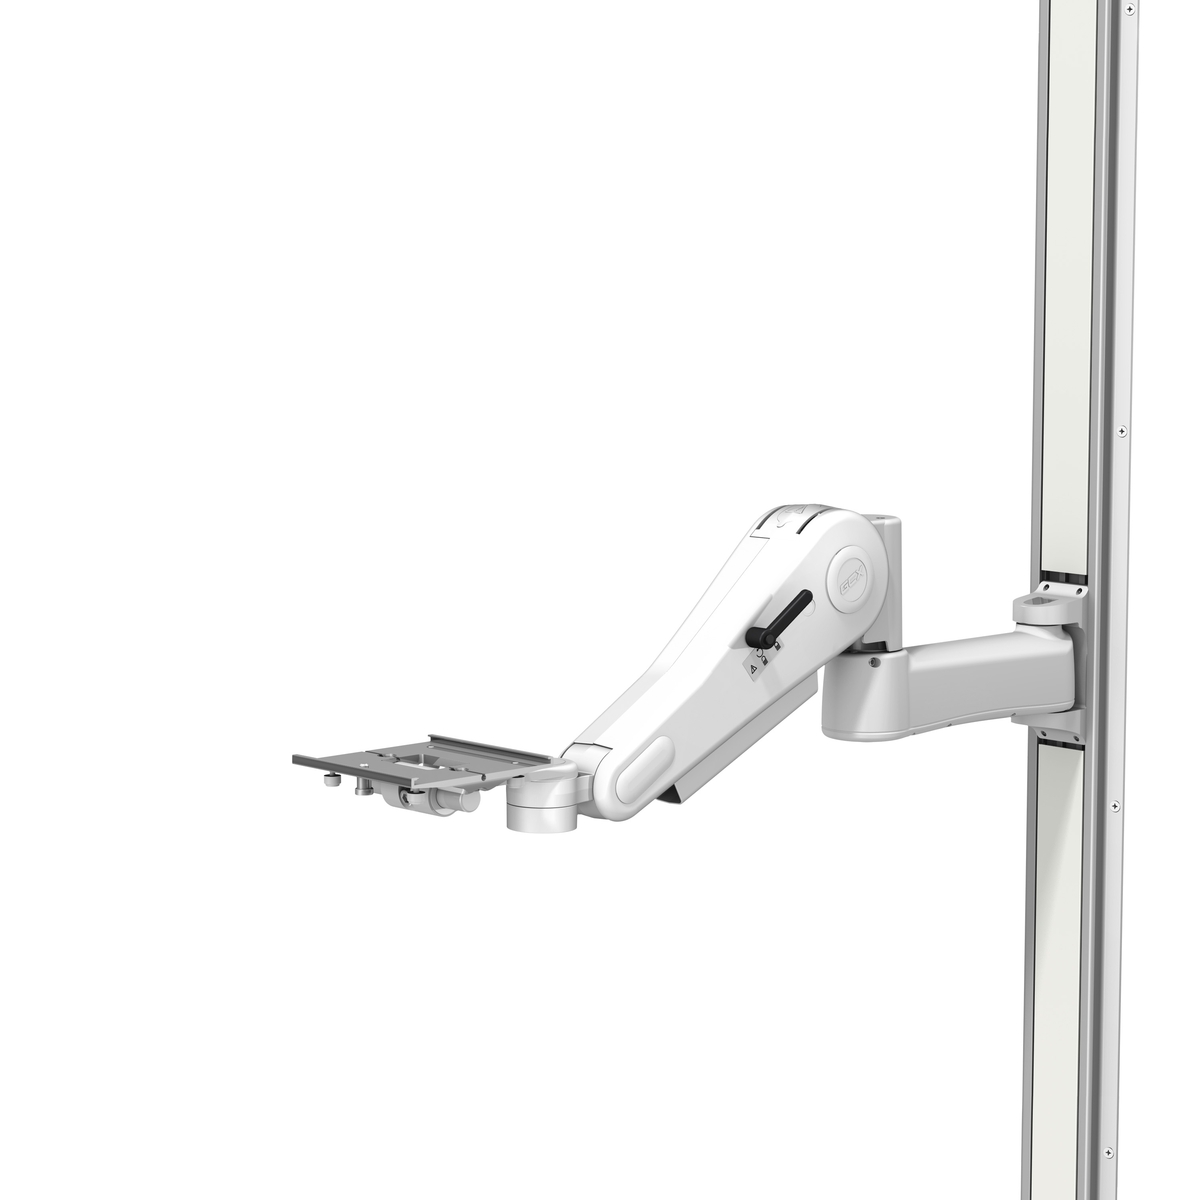 https://assets.gcx.com/transformed/images/products/ge-carescape-monitor-b450-on-vhm-variable-height-arm-channel-mount/879672/8__B450_8inExt_Vhm36Handle_Unloaded_LG_989e0efec8f676a640b774b4ec7554ce.jpg